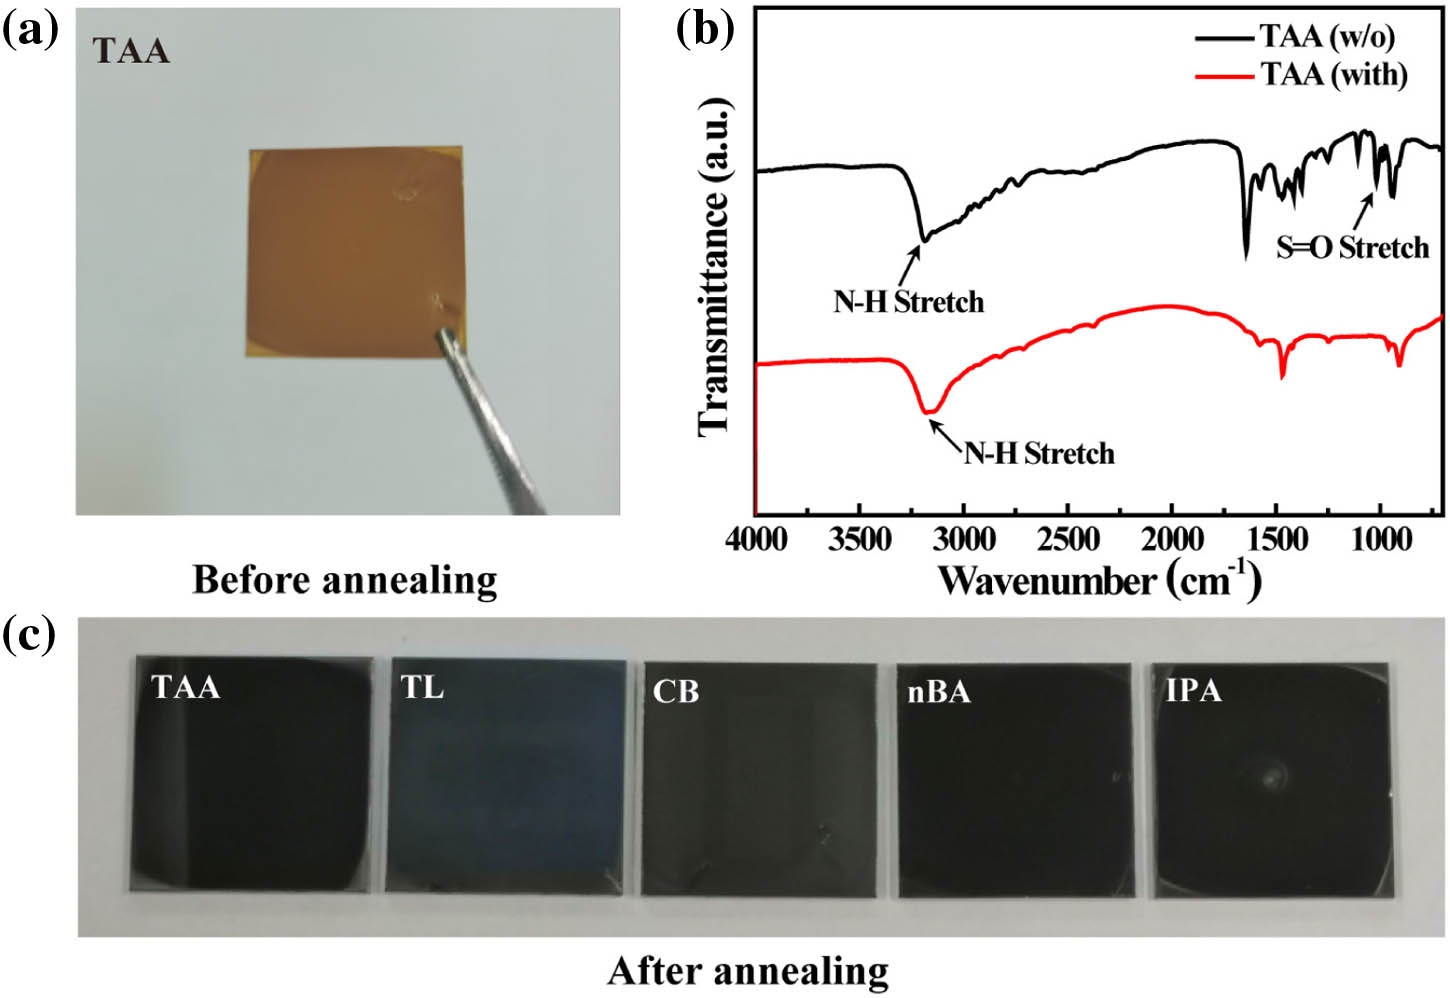 (a) Photograph of TAA-PSK film on ITO glass before annealing. (b) FTIR spectra of TAA-PSK films with and without annealing. (c) Photographs of different antisolvents processed films after annealing.